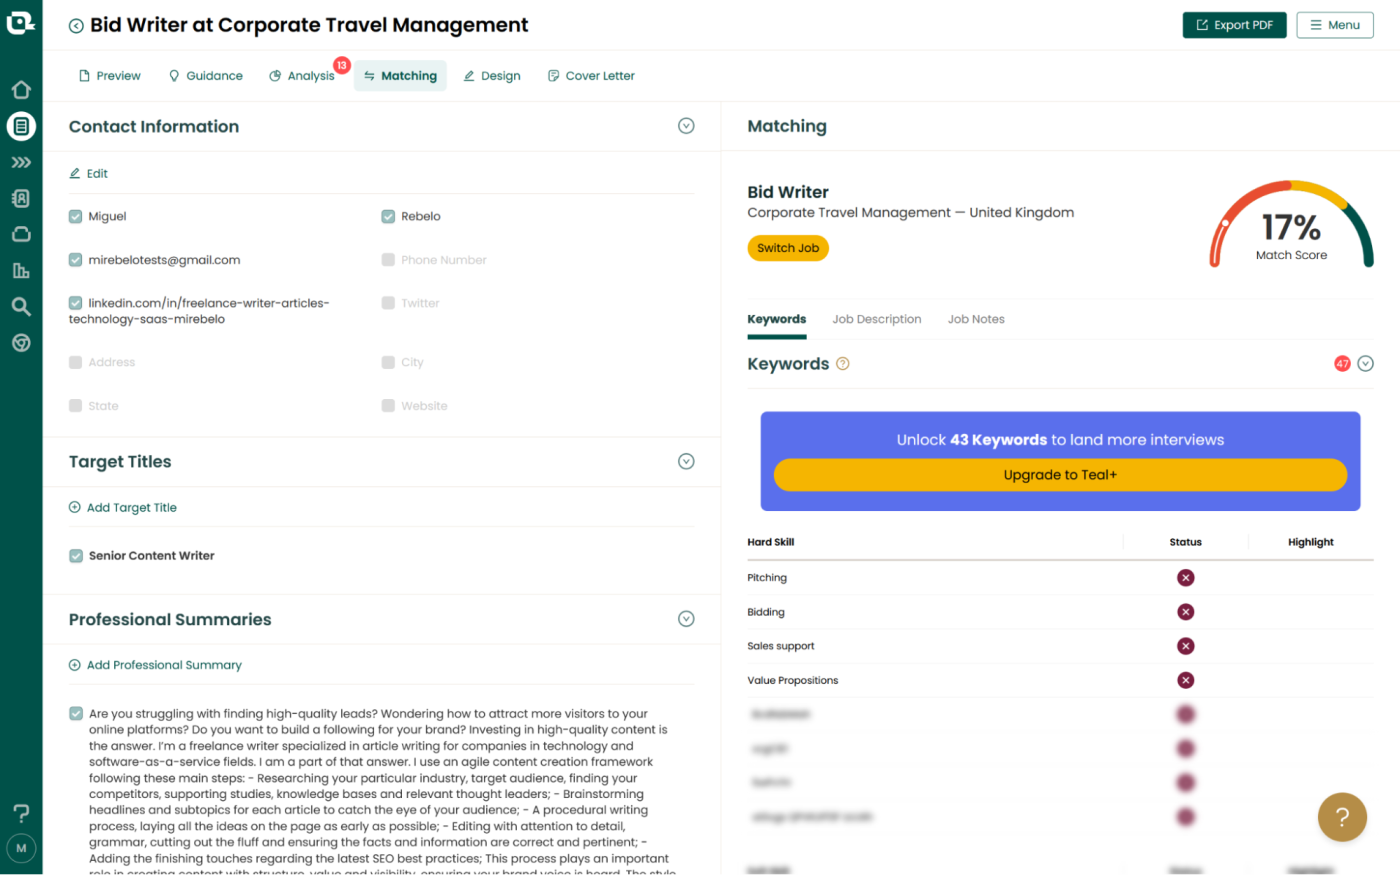 Teal, our pick for the best free resume builder for tracking multiple job applications